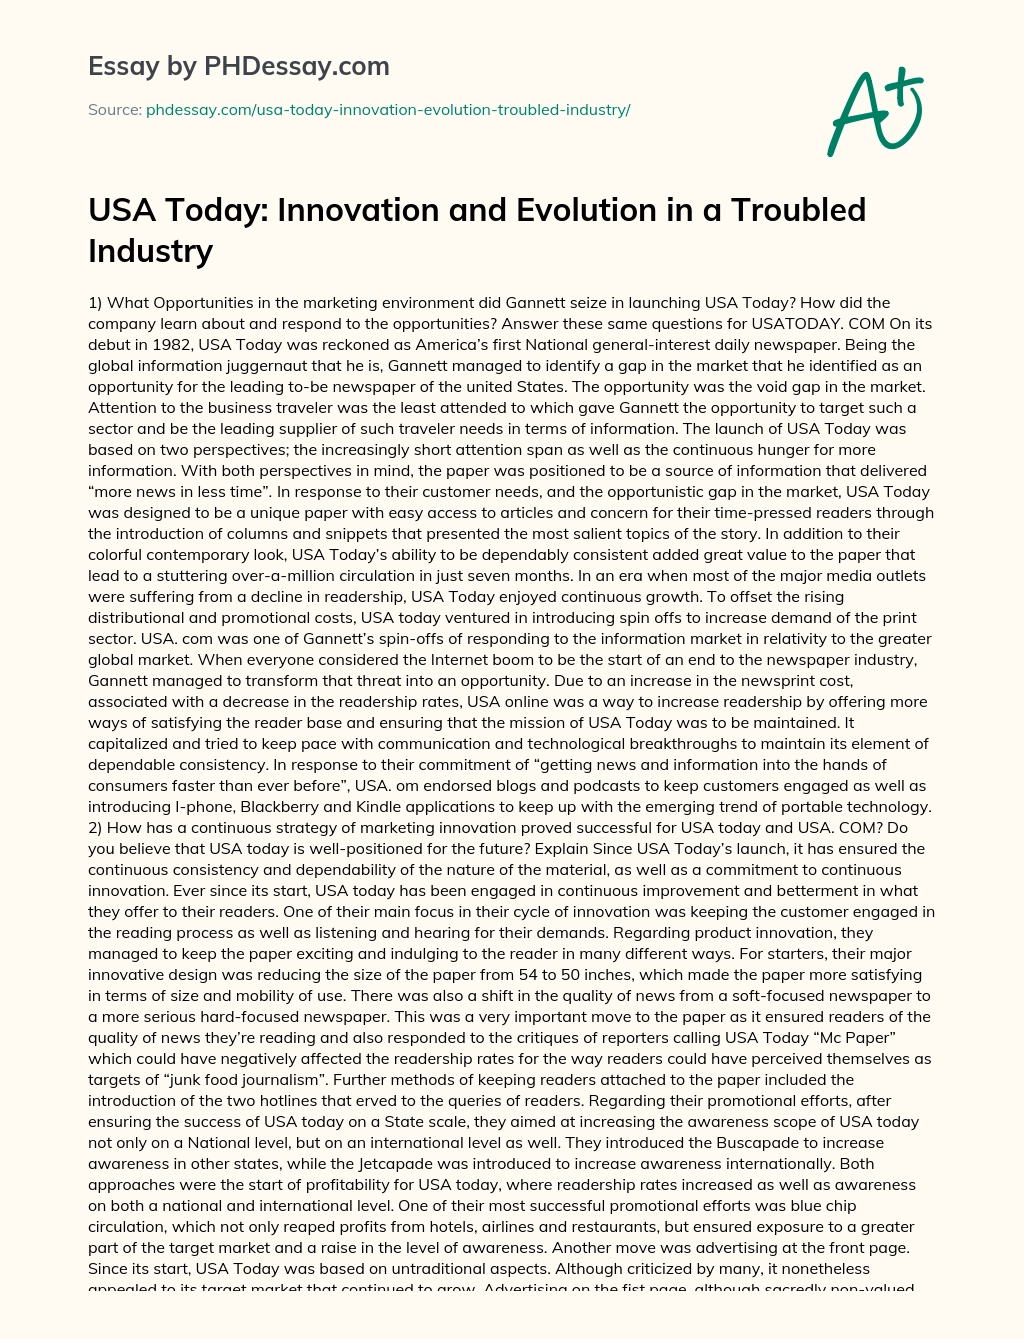 USA Today: Innovation and Evolution in a Troubled Industry essay